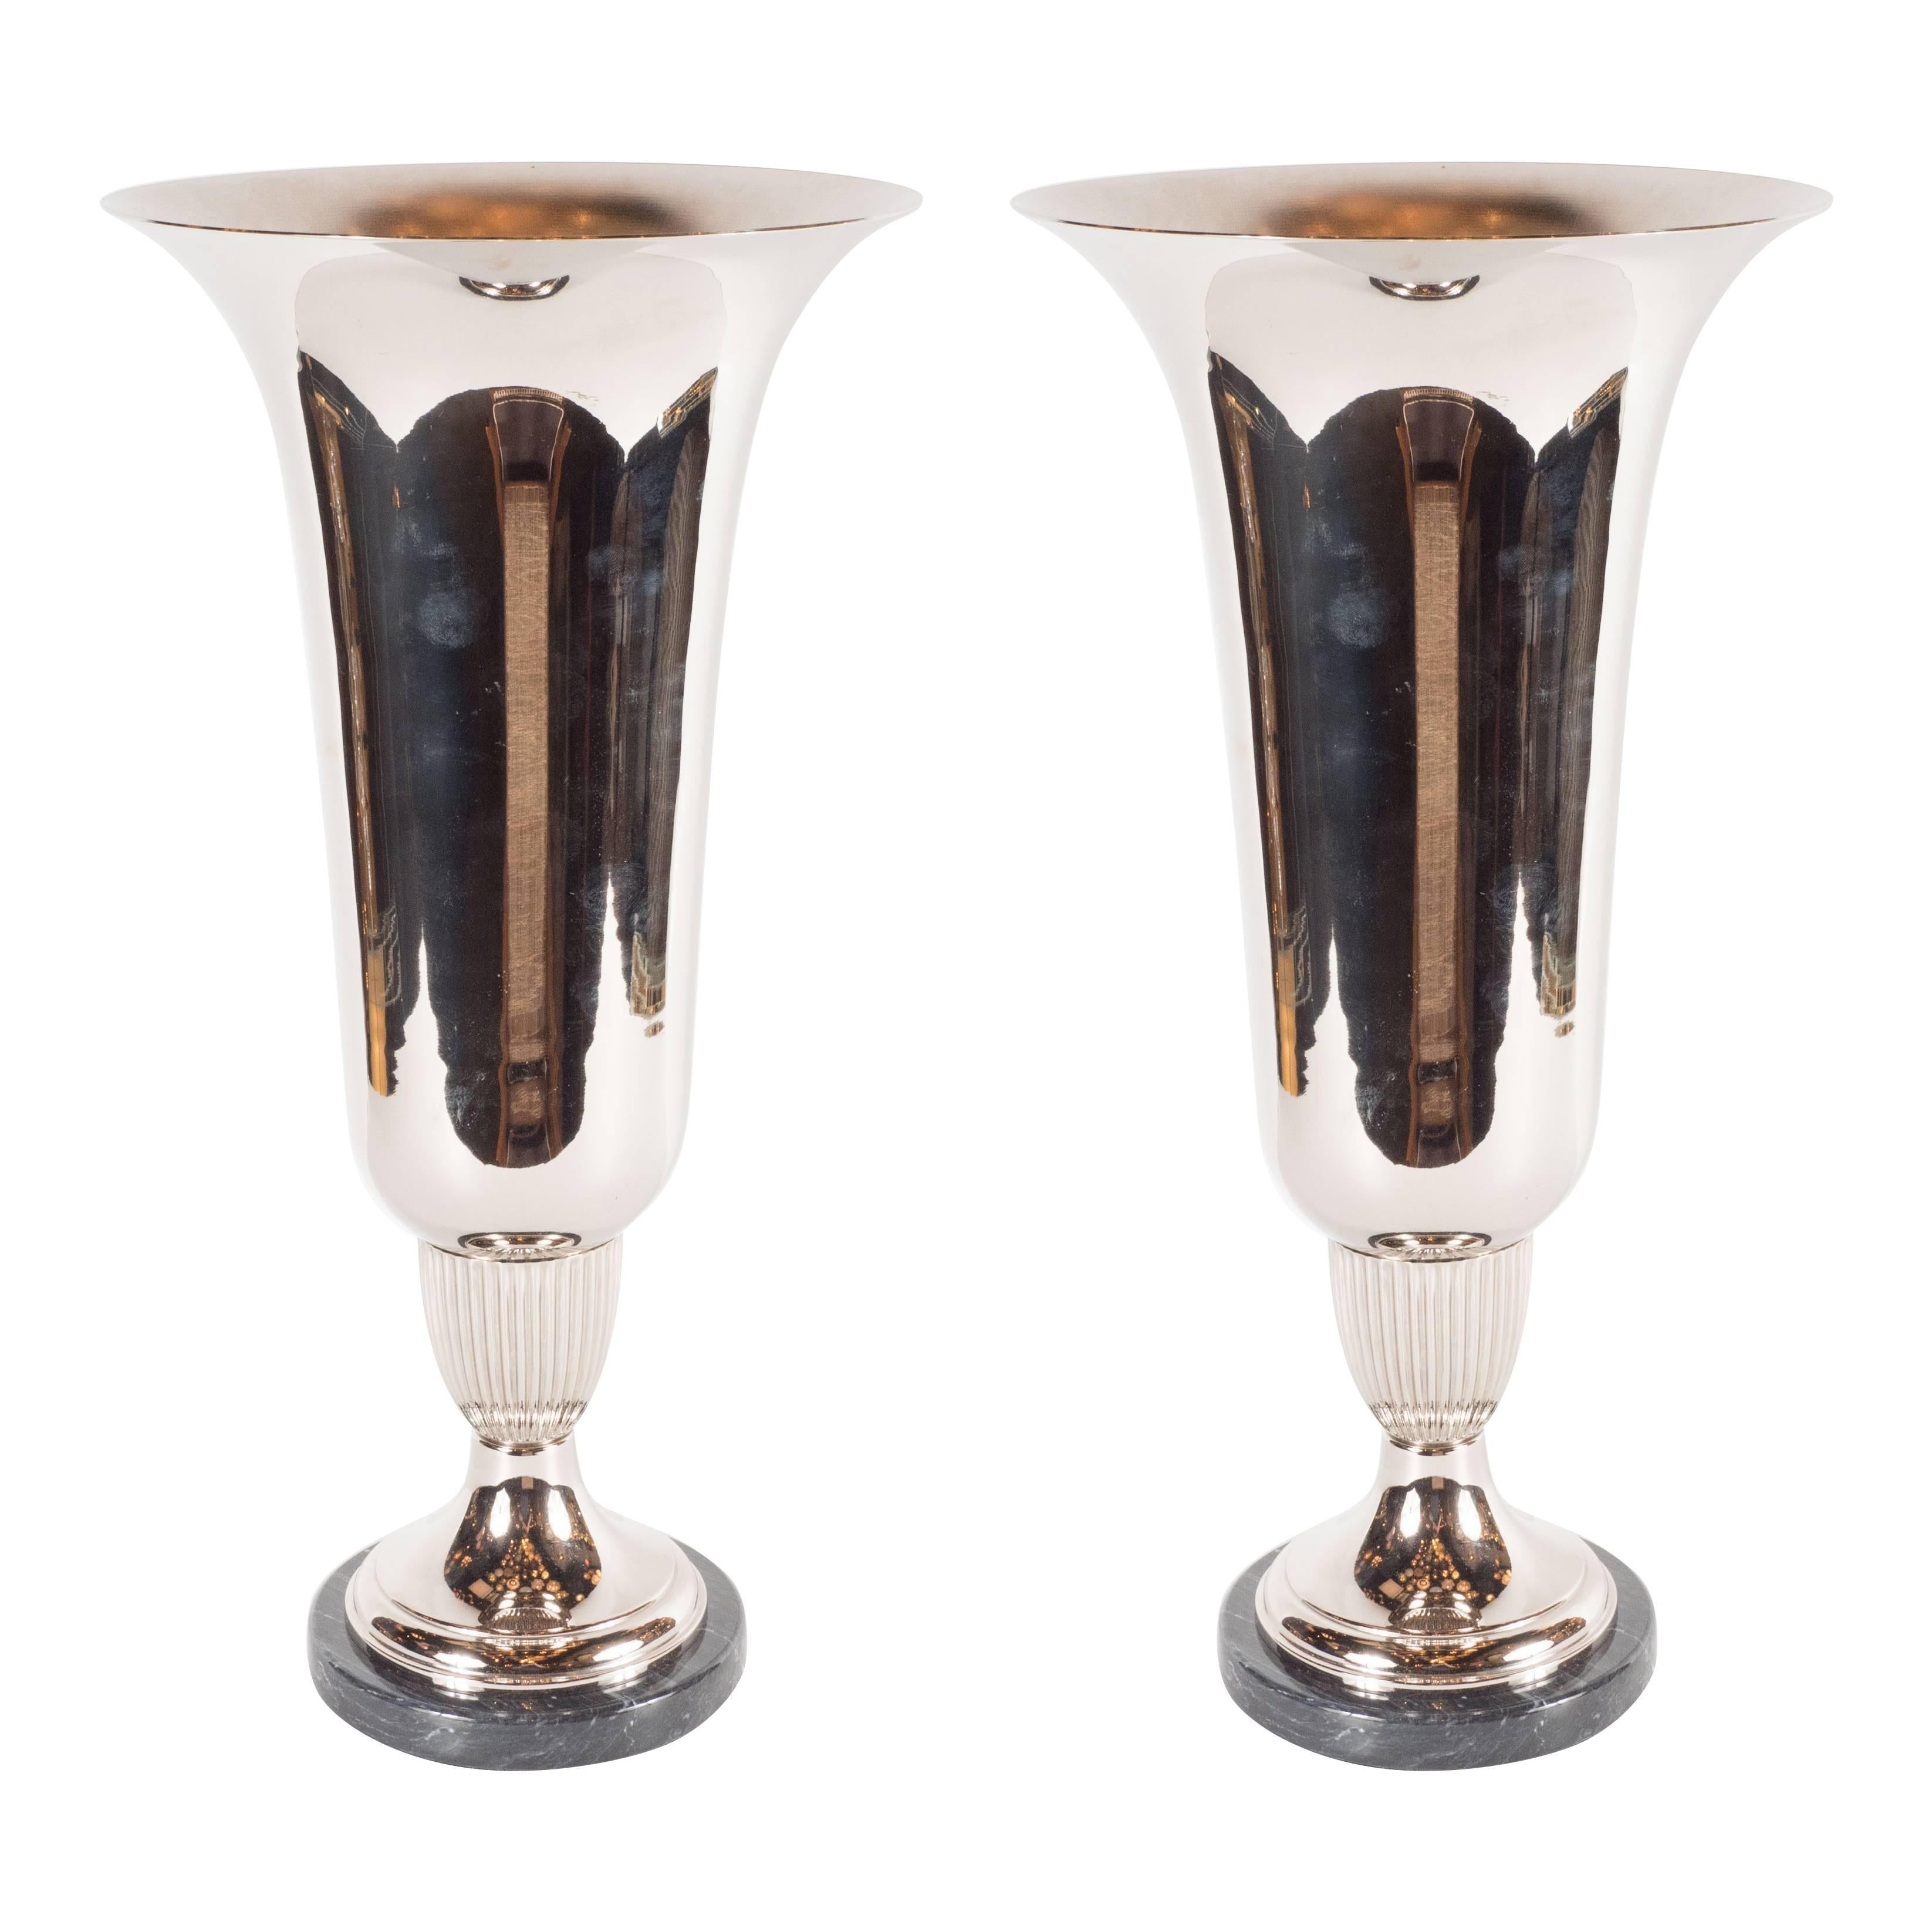 Elegant French Art Deco Marble and Chrome Uplights